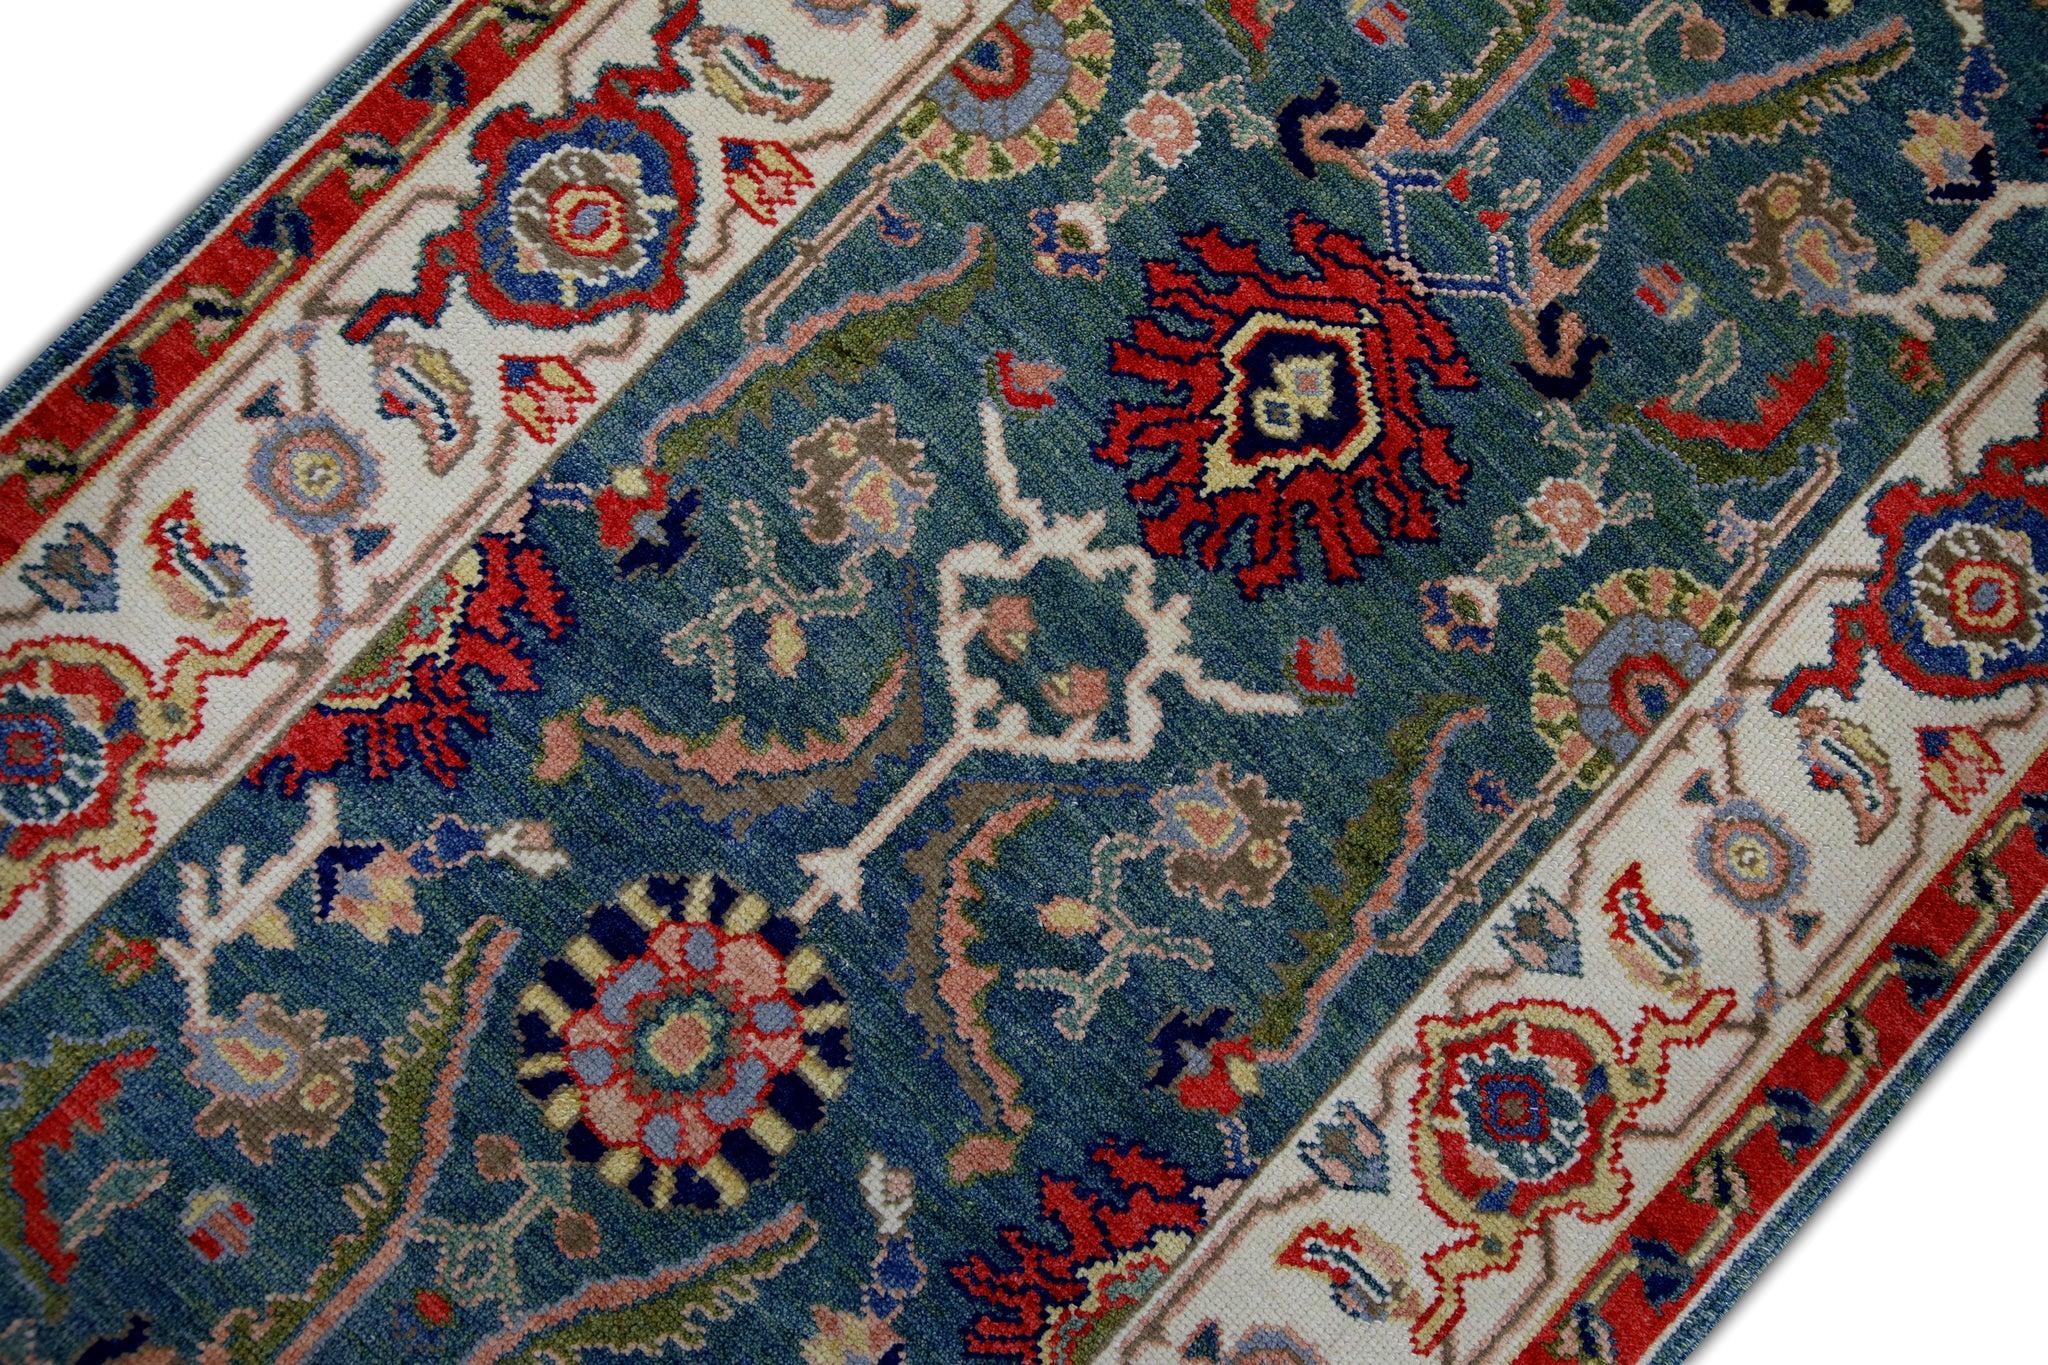 Contemporary Floral Turkish Finewoven Wool Oushak Rug in Red, Green, and Blue 2'9